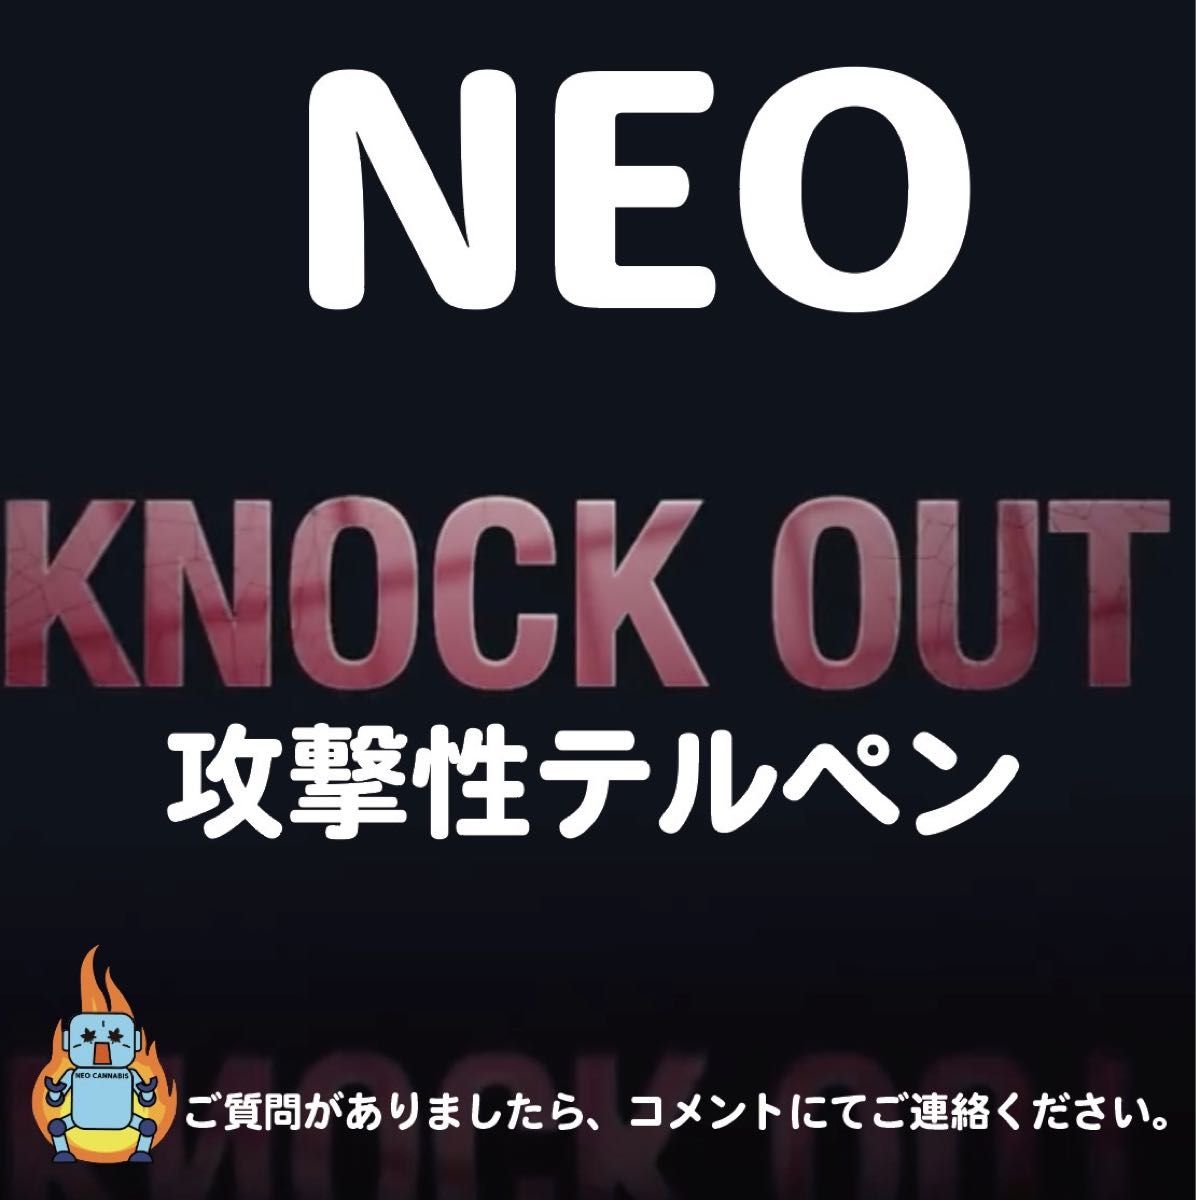 Knock out 攻撃性テルペン　0.5ml